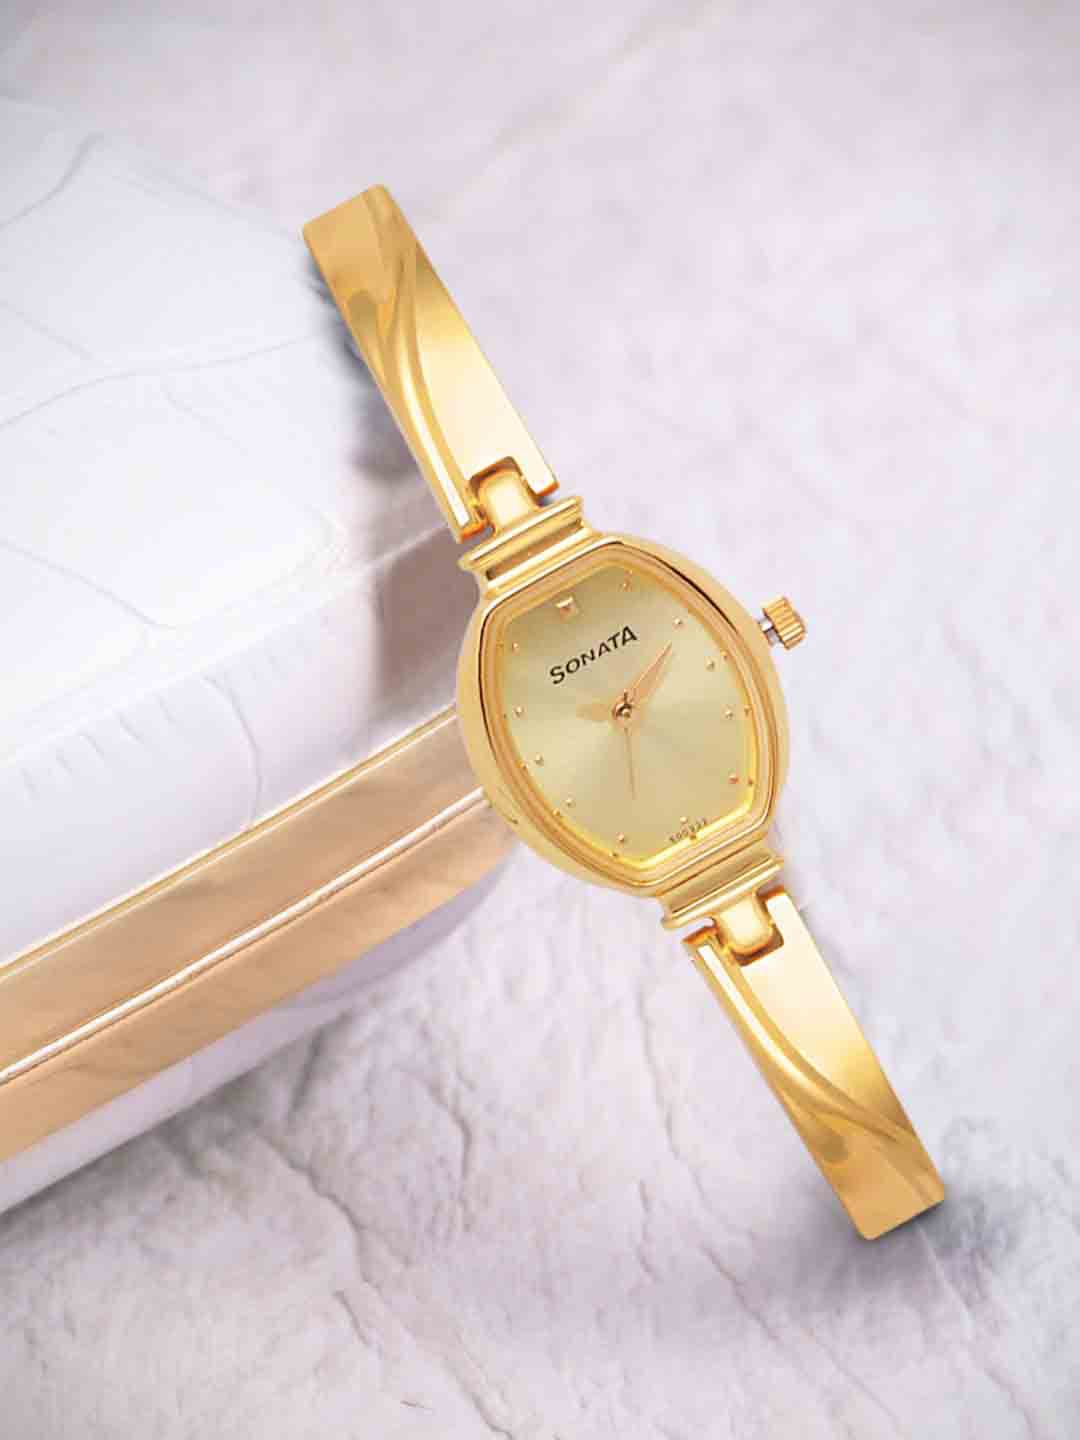 Sonata Women Gold-Toned Analogue Watch NK8111YM01 Price in India